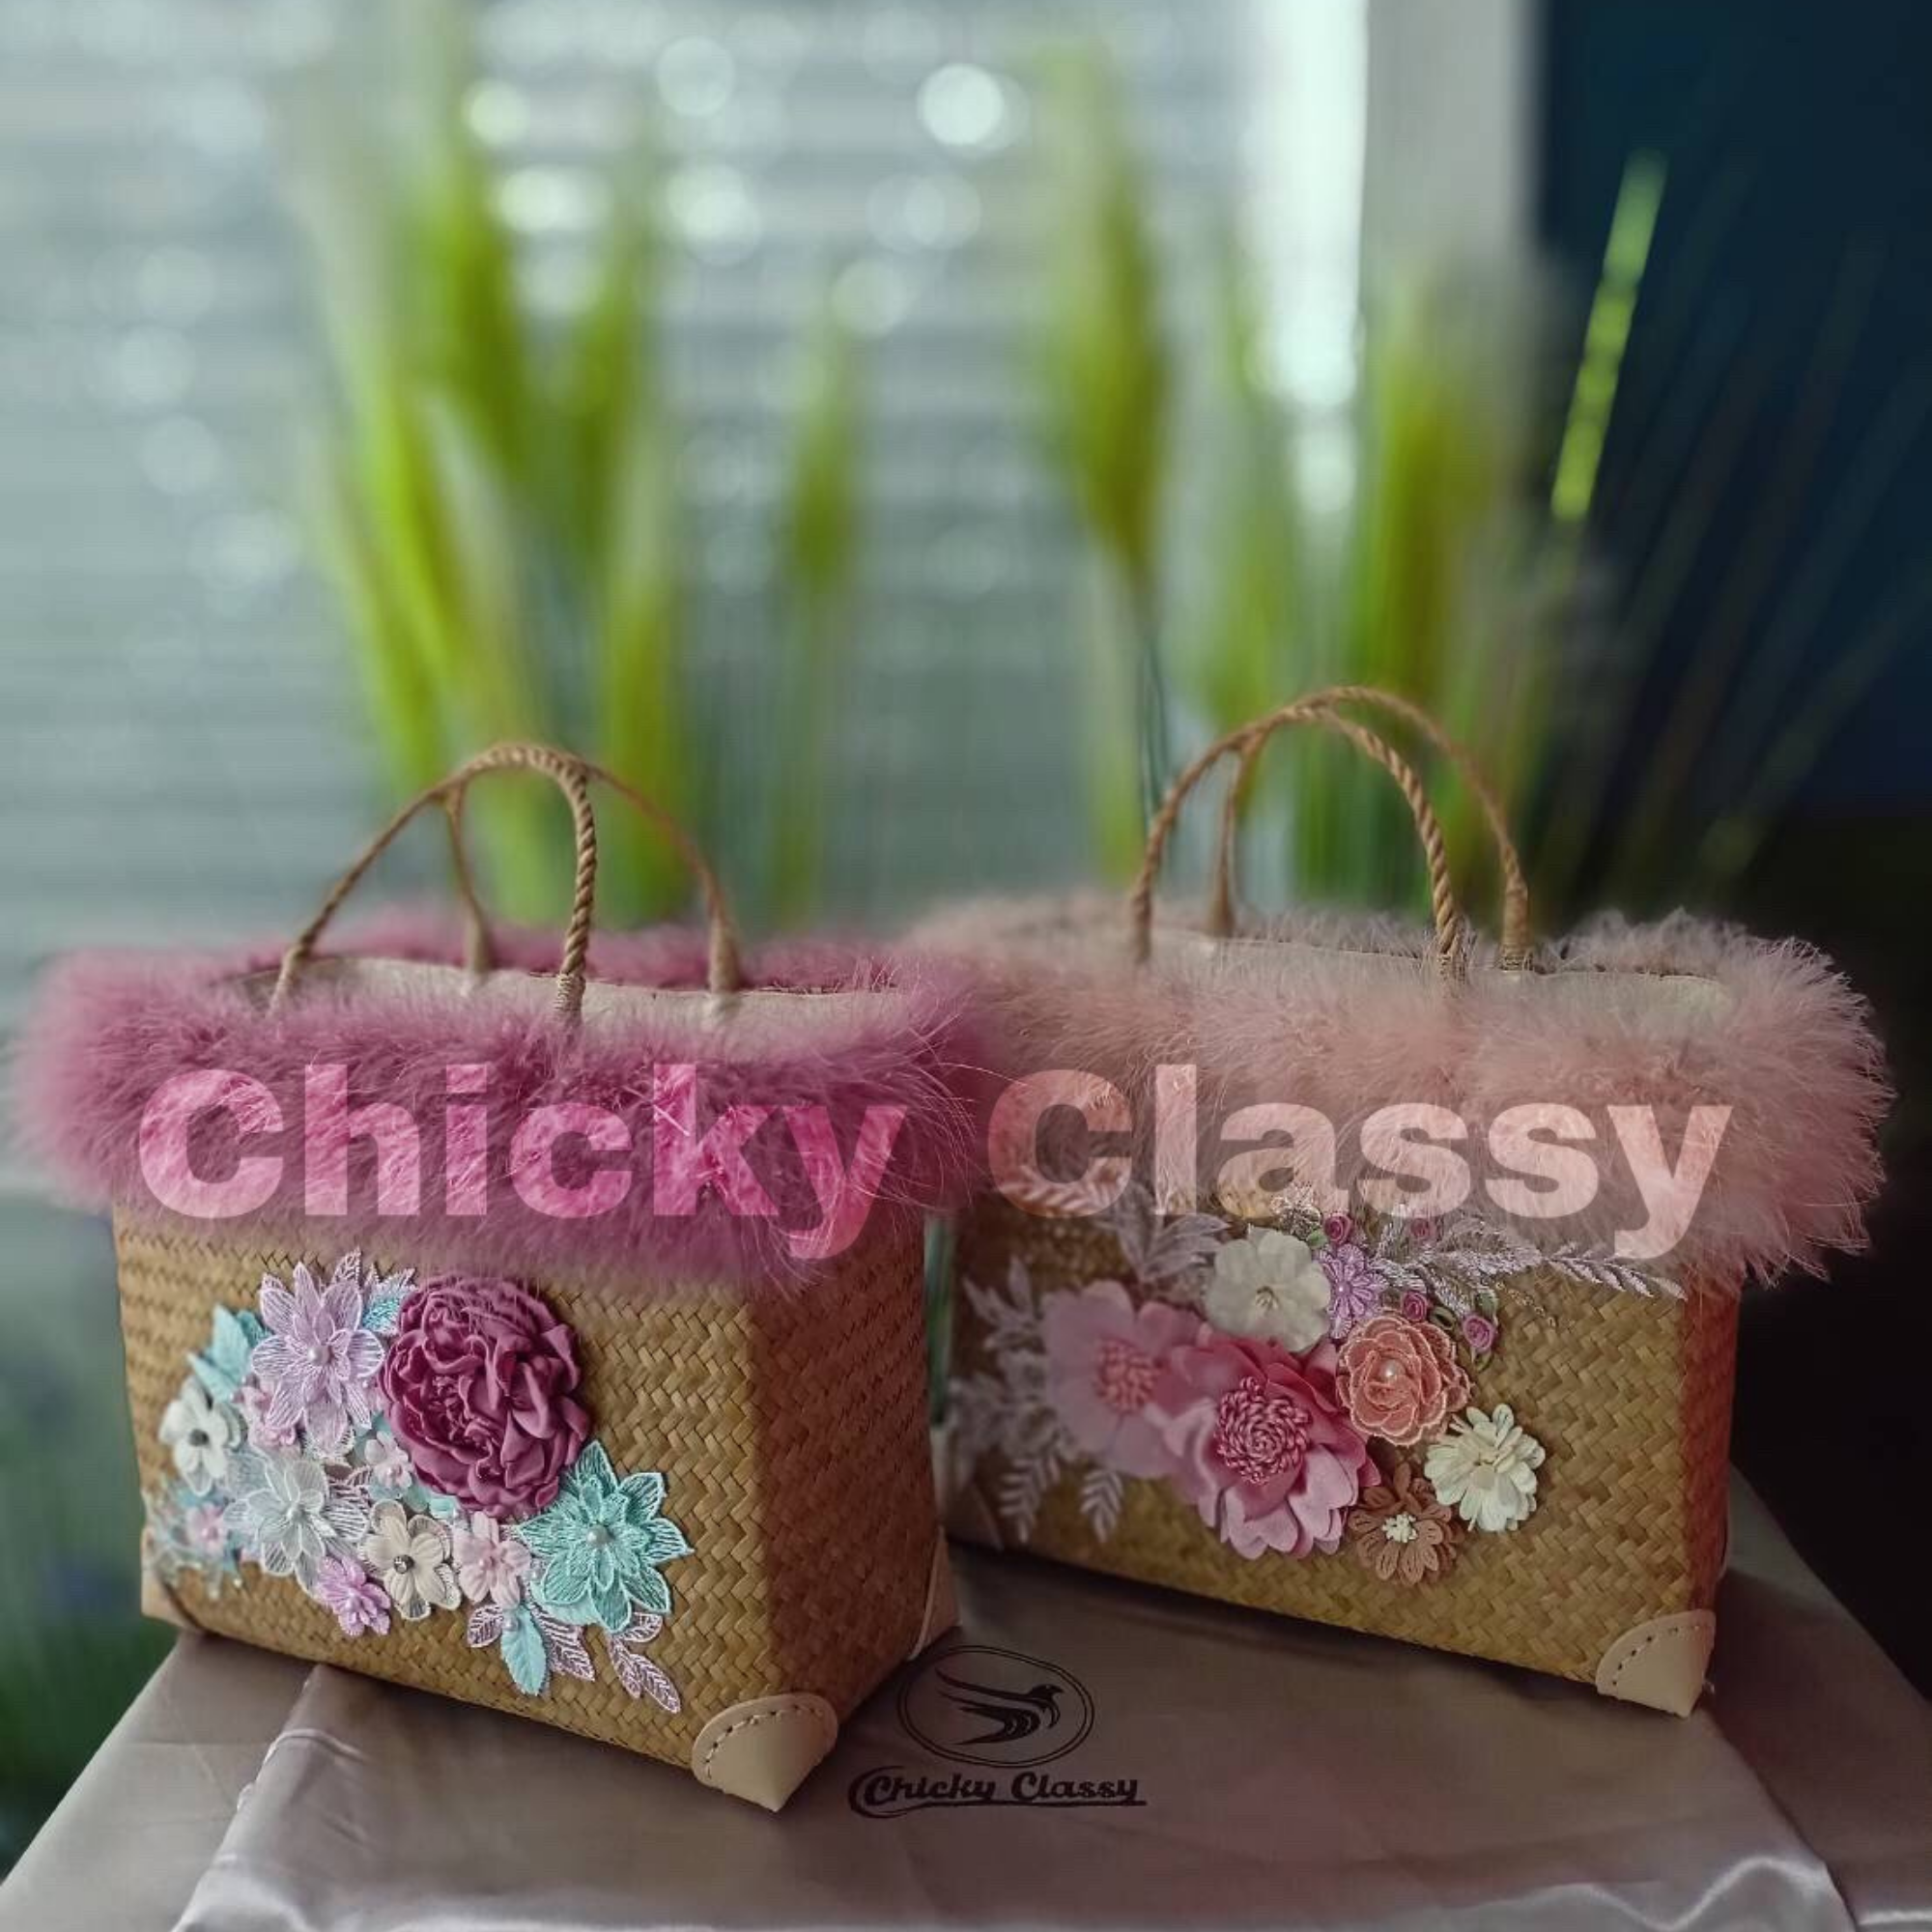 Chicky Classy home made bag conservative